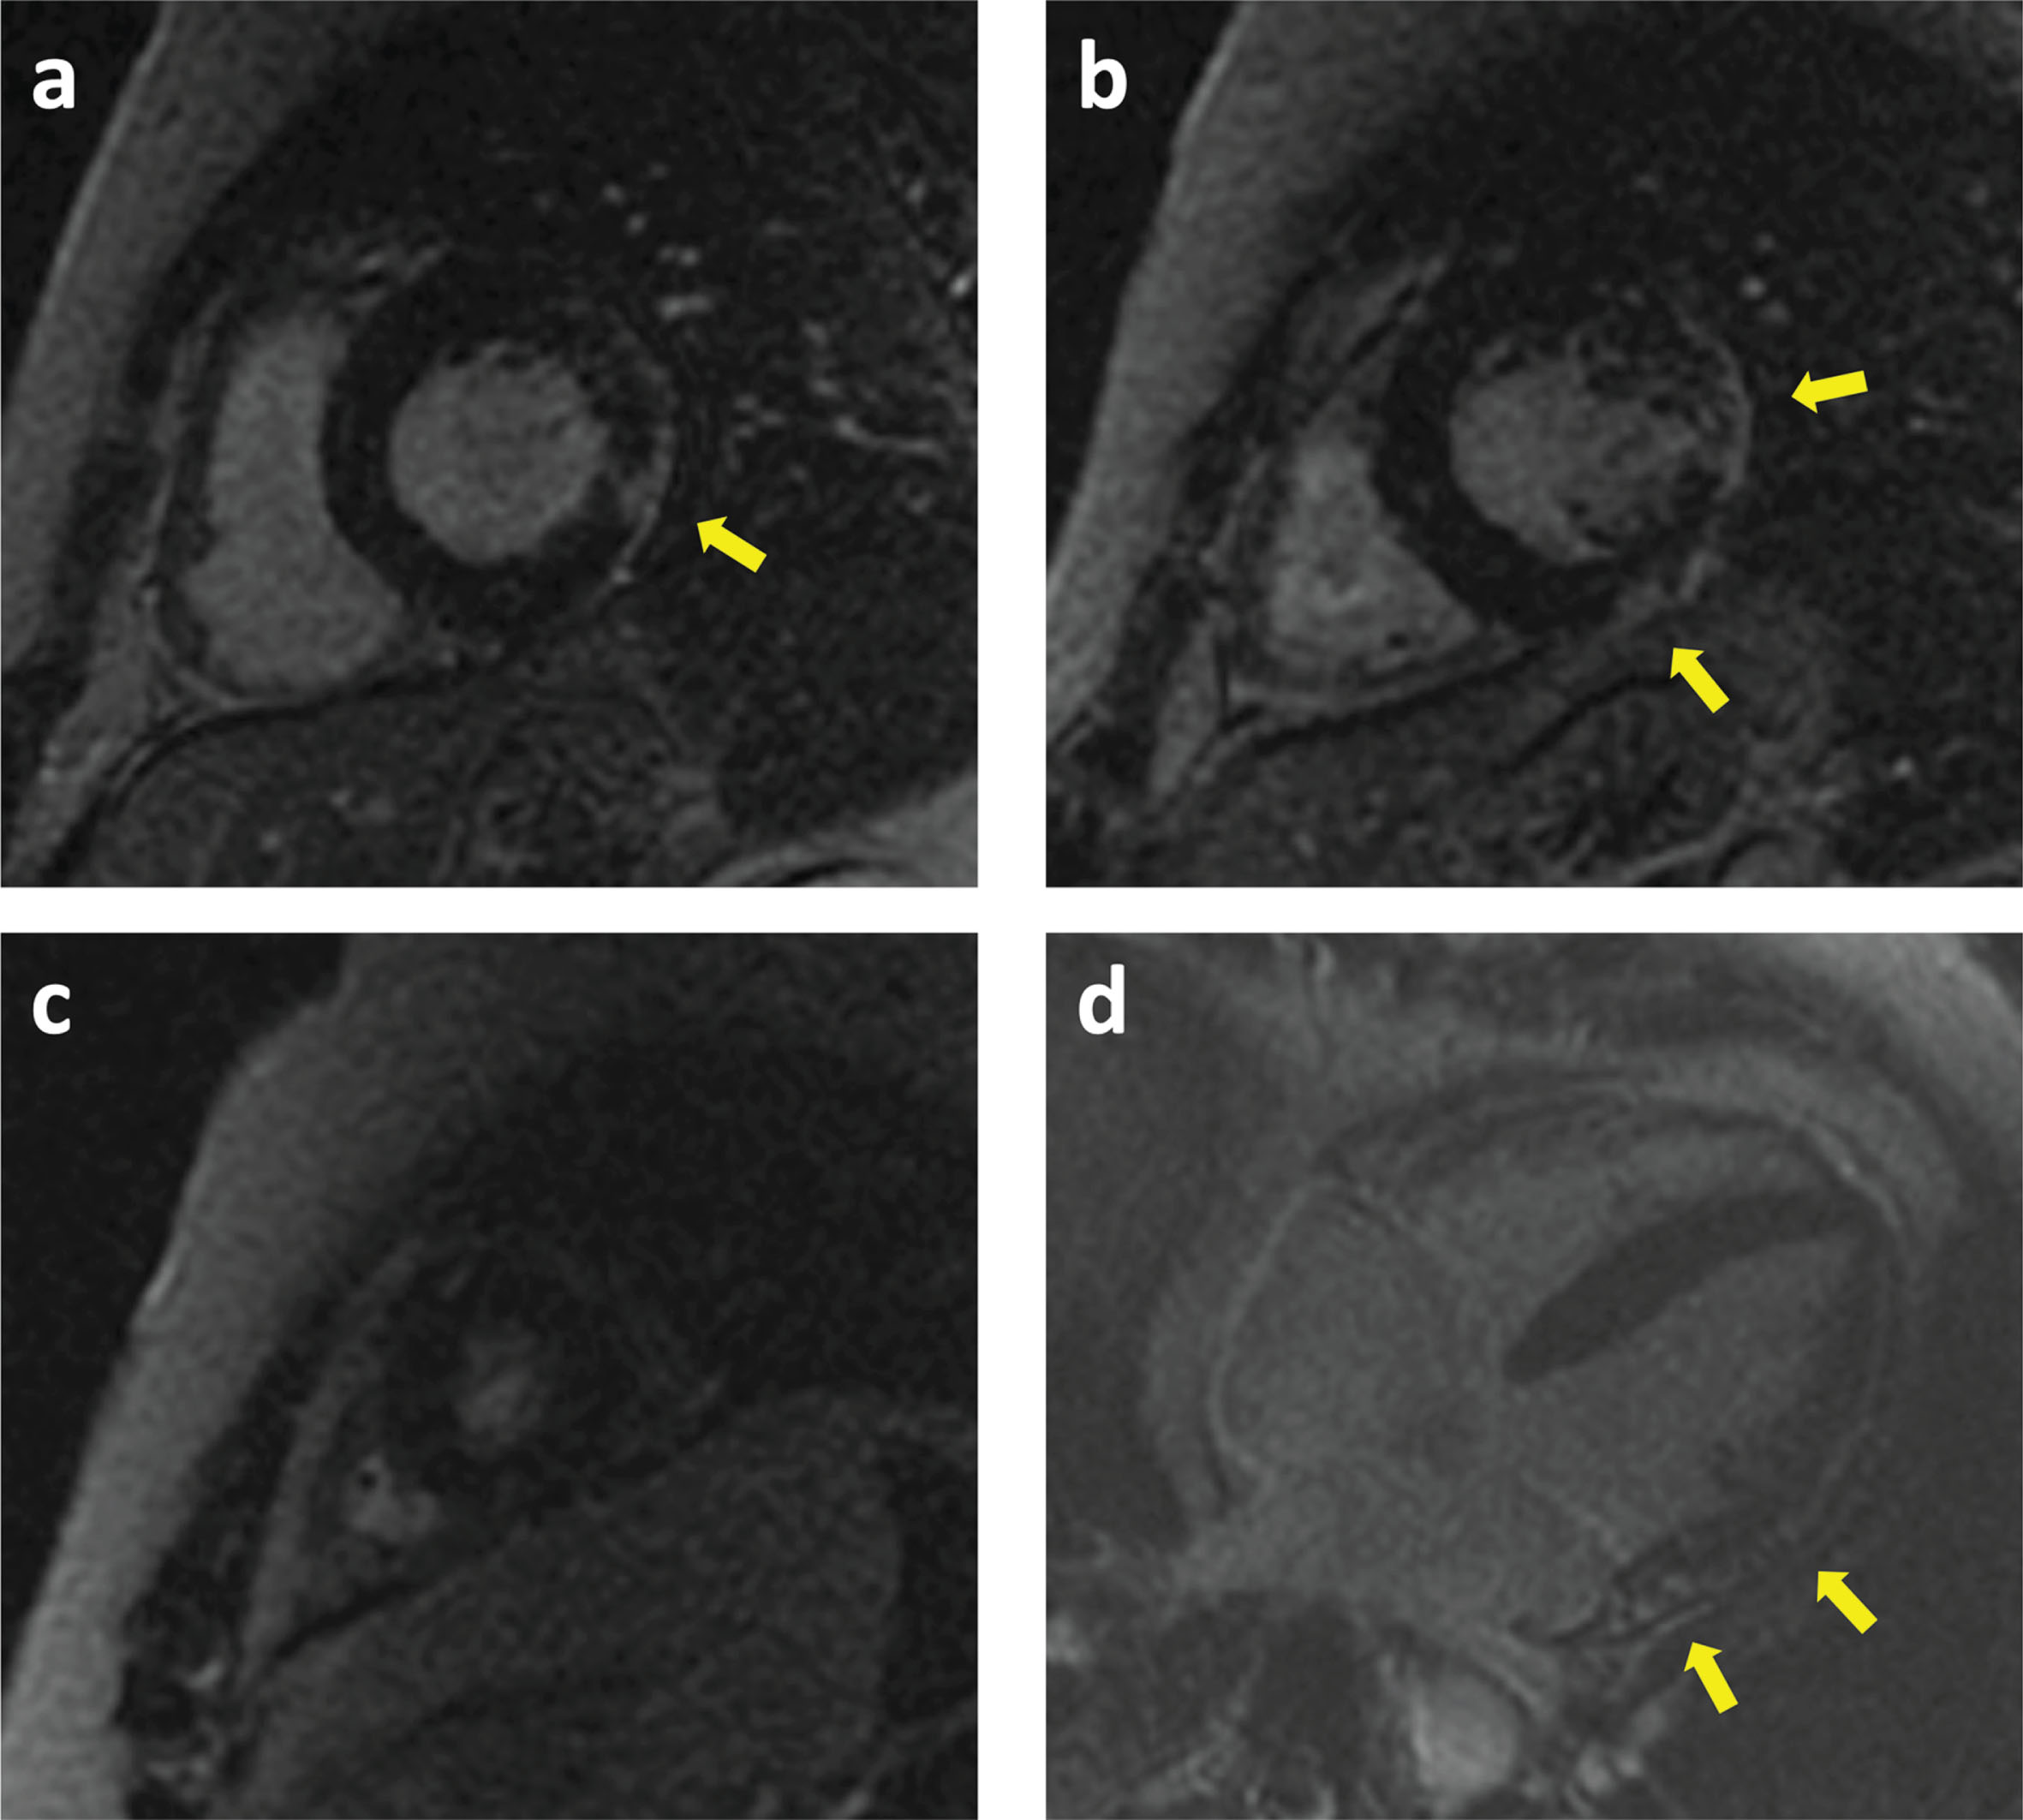 Cardiac MRI of patient 12. Basal (a), mid (b), apical (c) and four chamber (d) views showing Late Gadolinium Enhancement (LGE) in the anterolateral and inferolateral walls (arrows) with a subepicardial pattern.